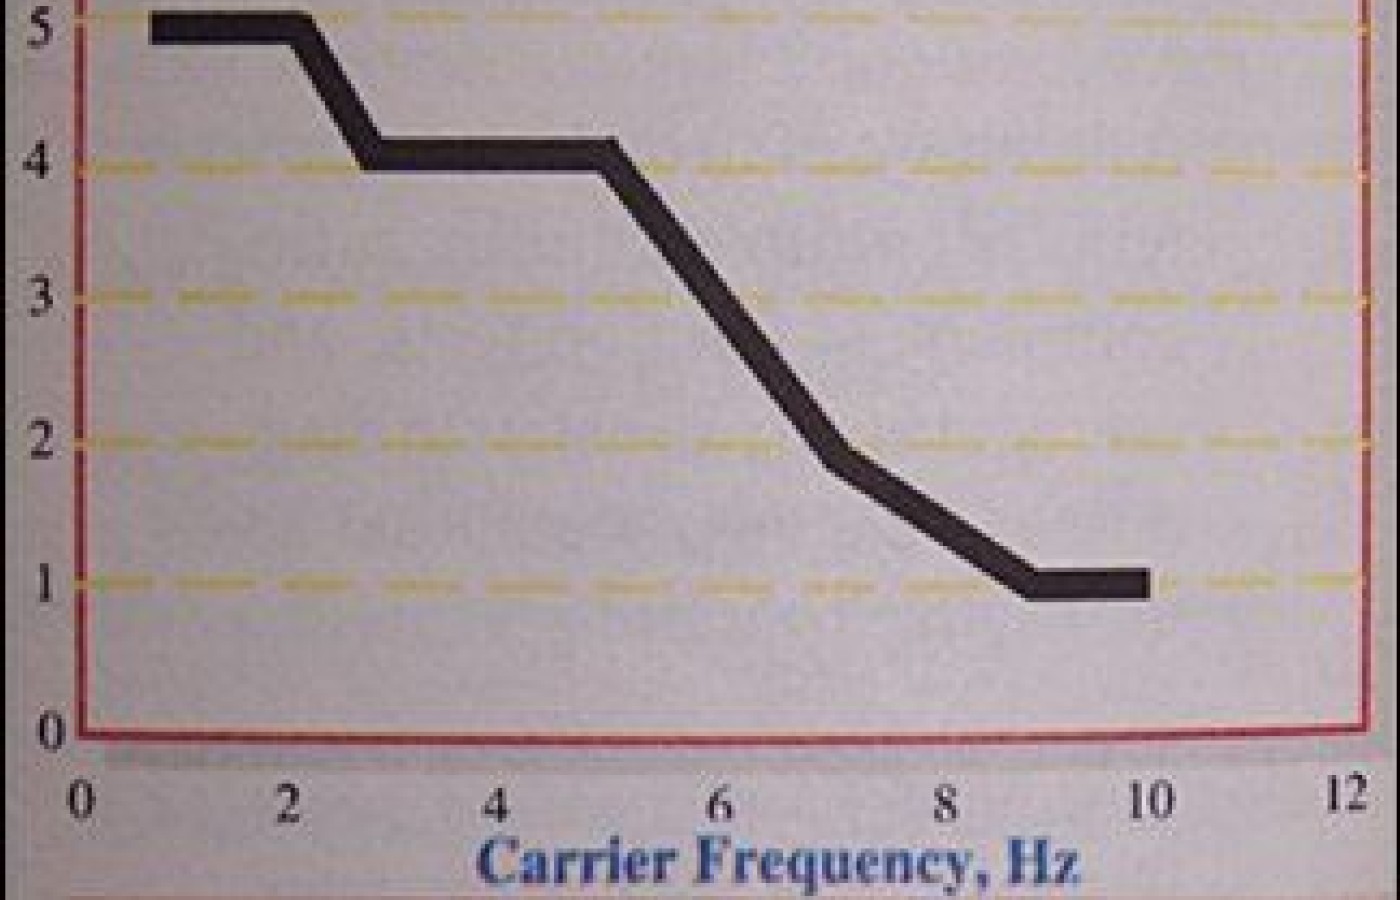 Diagram of Pain Level vs. Carrier Frequency